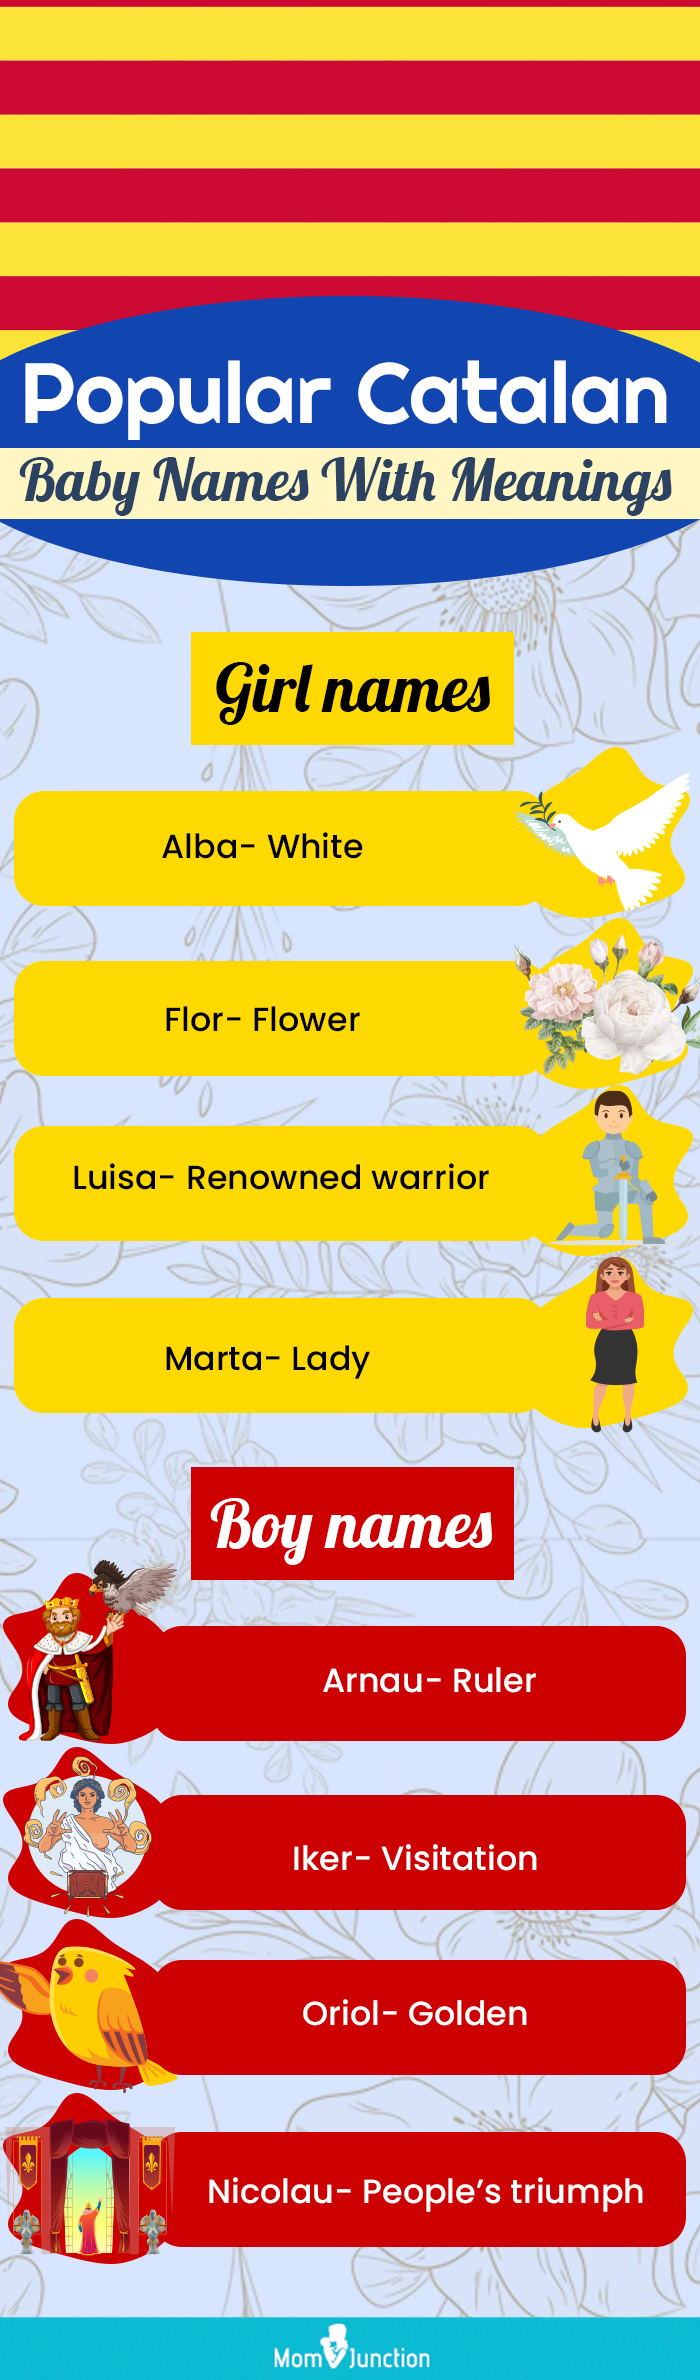 popular catalan baby names with meanings (infographic)